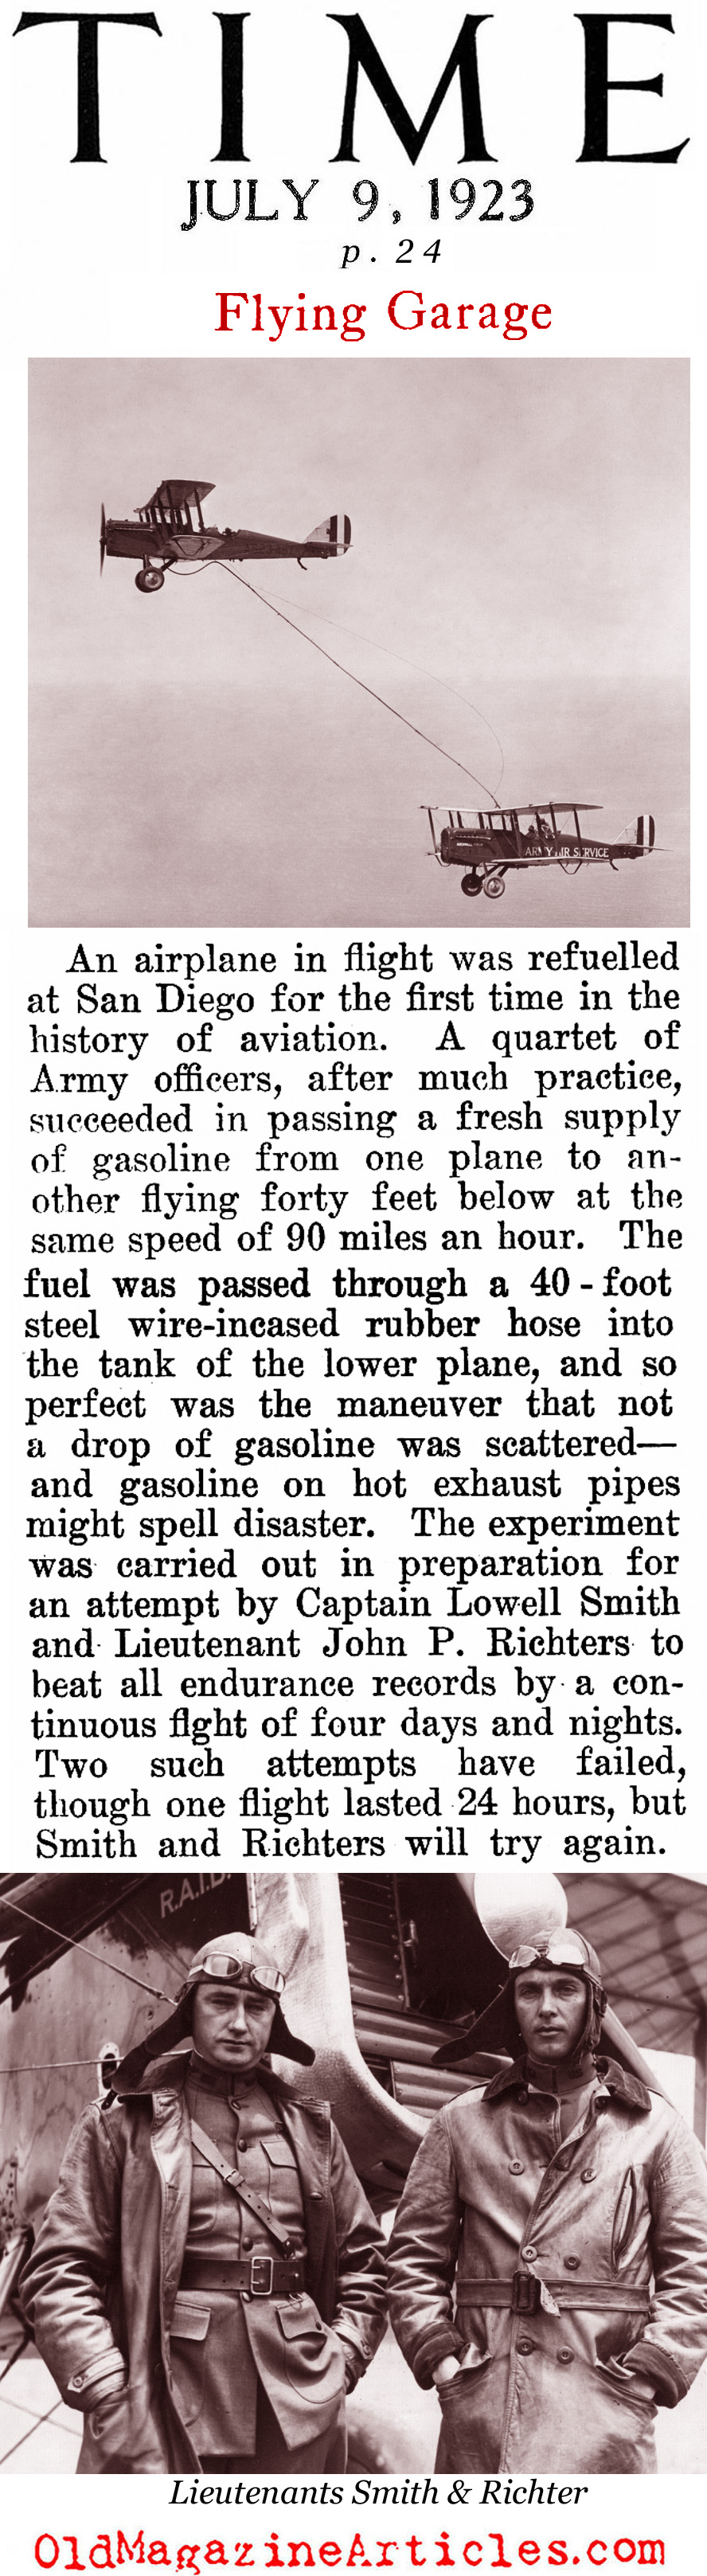 The Earliest Mid-Flight Refueling (Time Magazine, 1923)